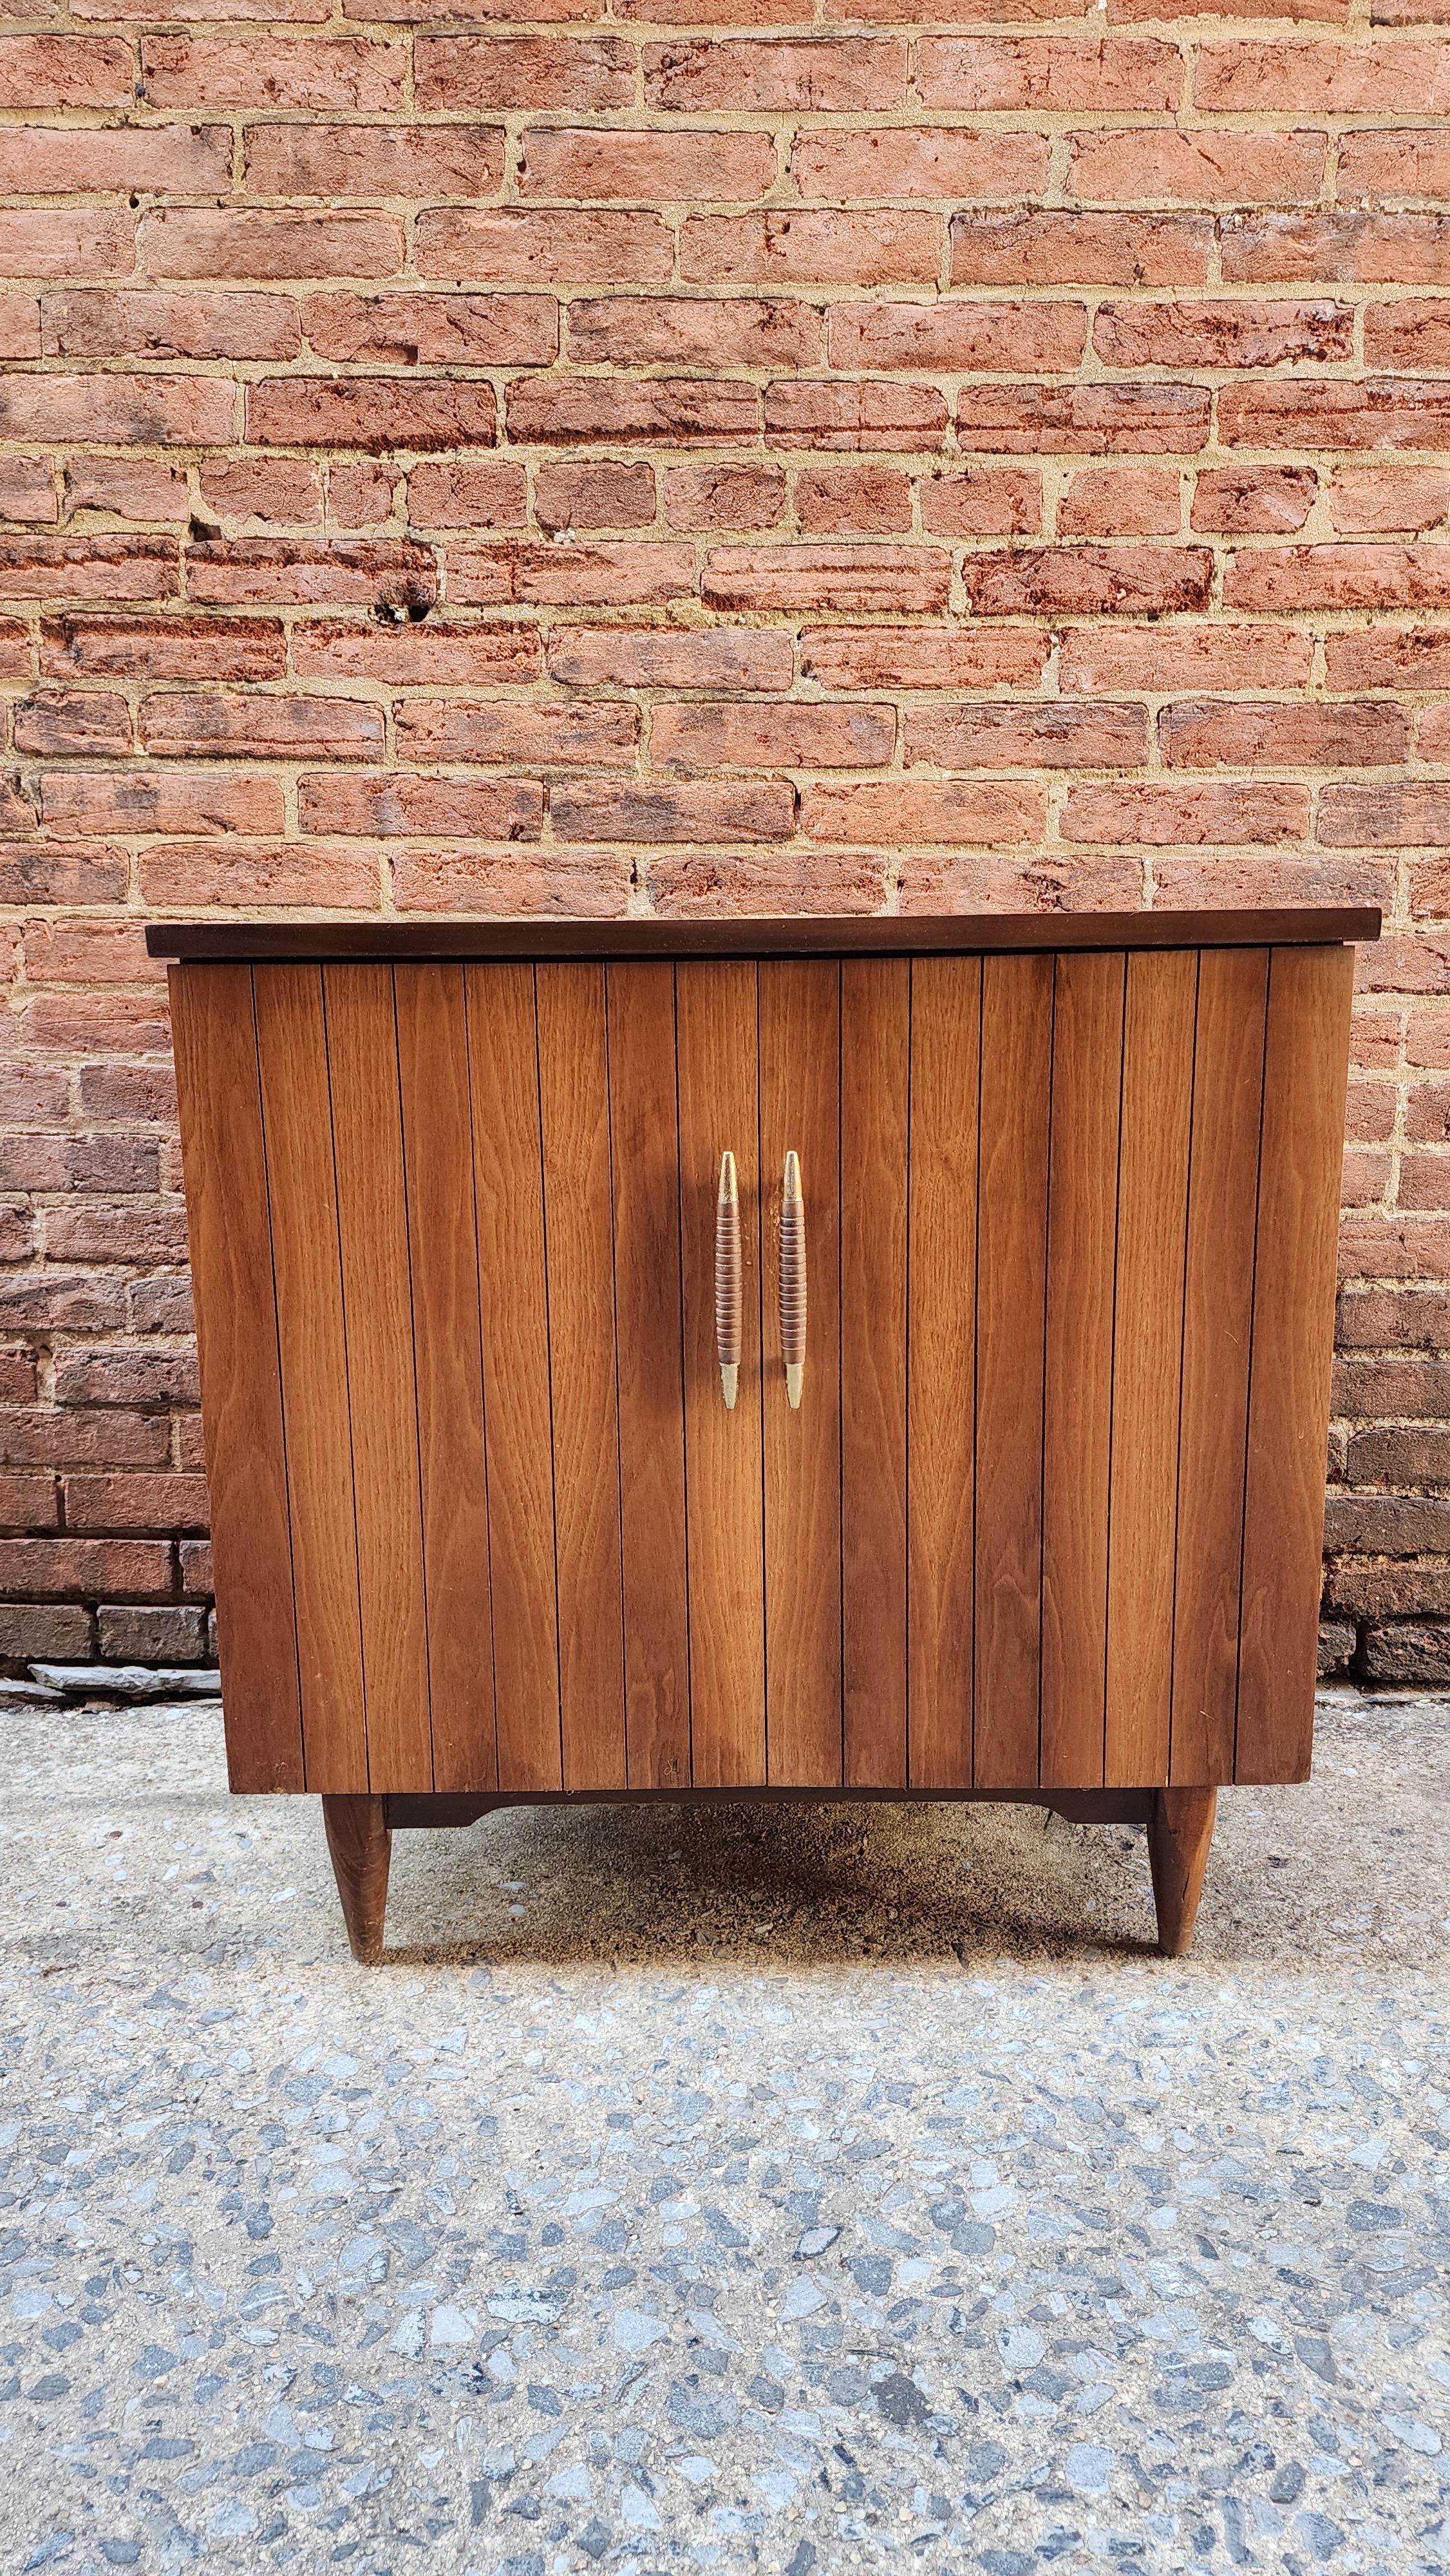 This walnut Mid-Century modern record cabinet is in the iconic style of the 1950s and 60s. The beautiful grain on the doors had been restored and enhanced to show off the beauty of the wood. Behind the doors is a divided space for your record